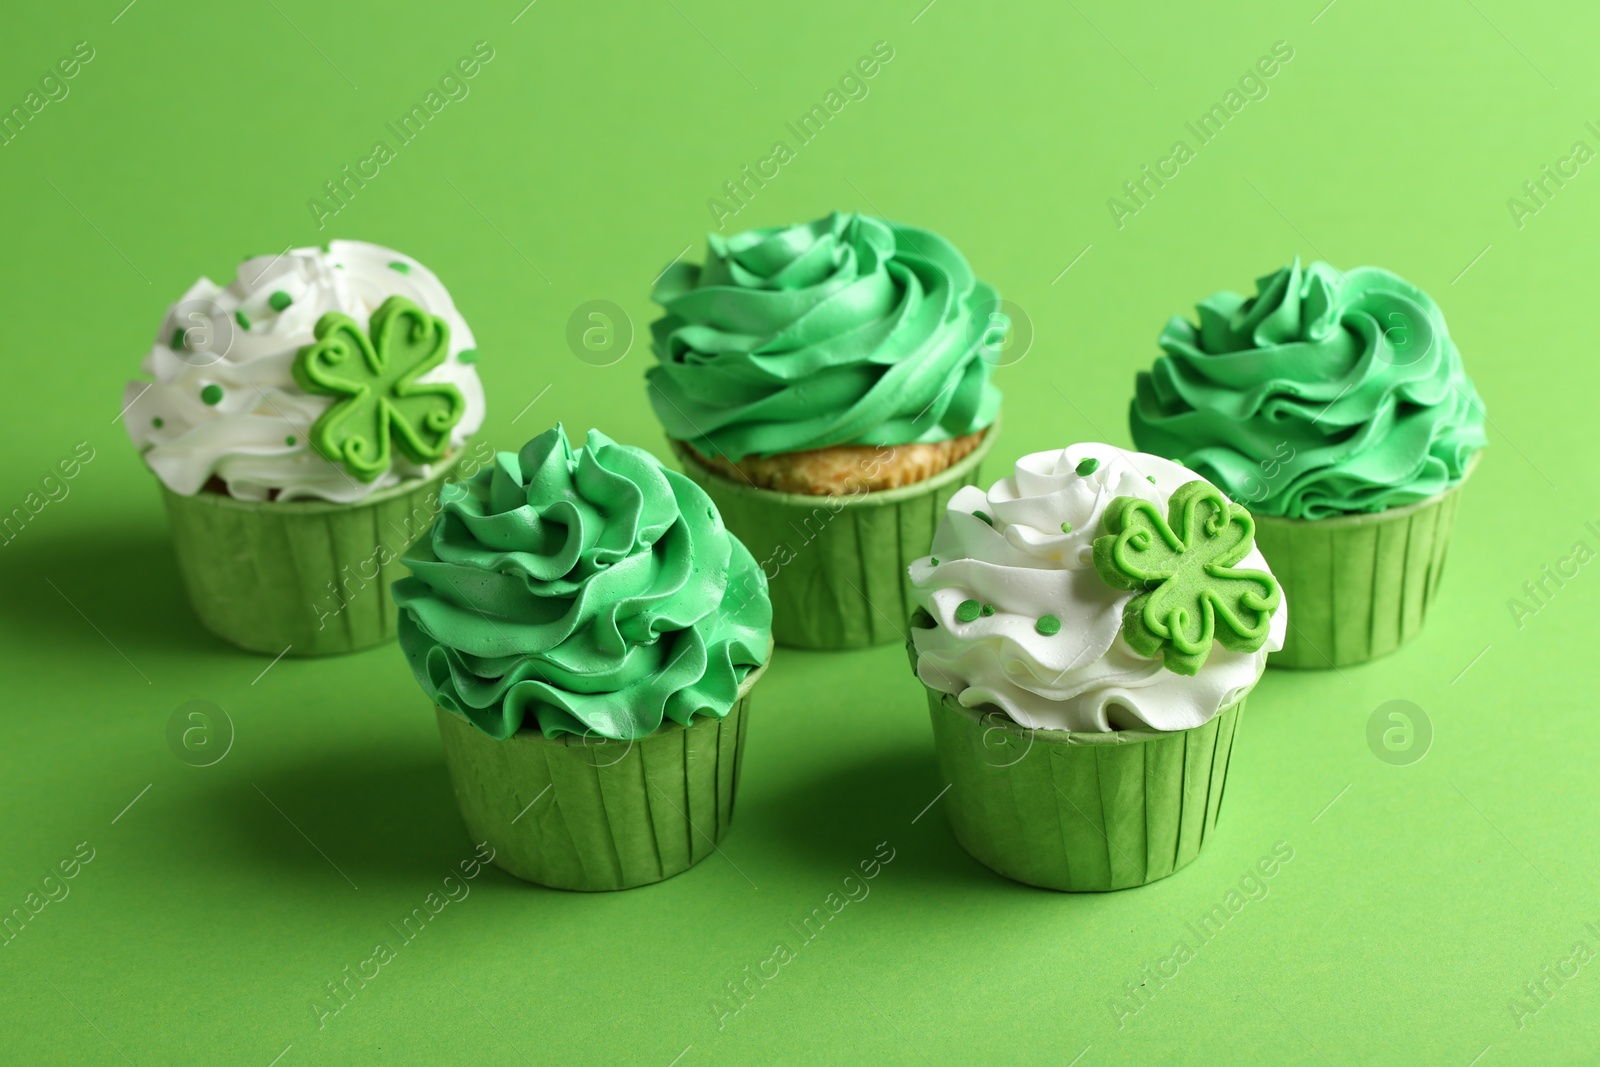 Photo of St. Patrick's day party. Tasty festively decorated cupcakes on green background